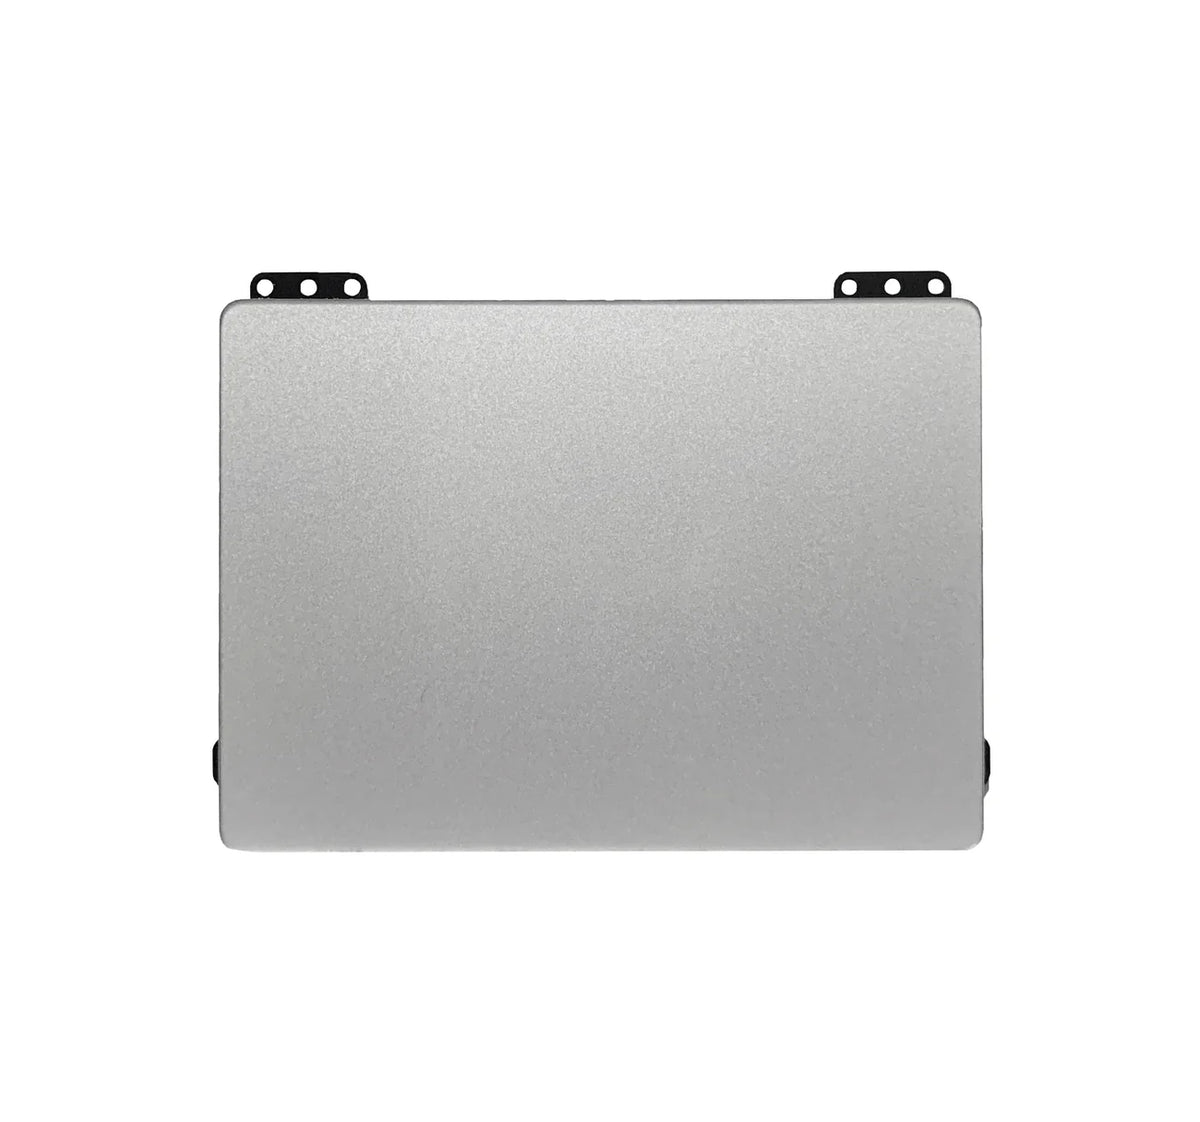 Genuine Trackpad for MacBook Air 13 inch 2013 - 2017 Model (A1466)